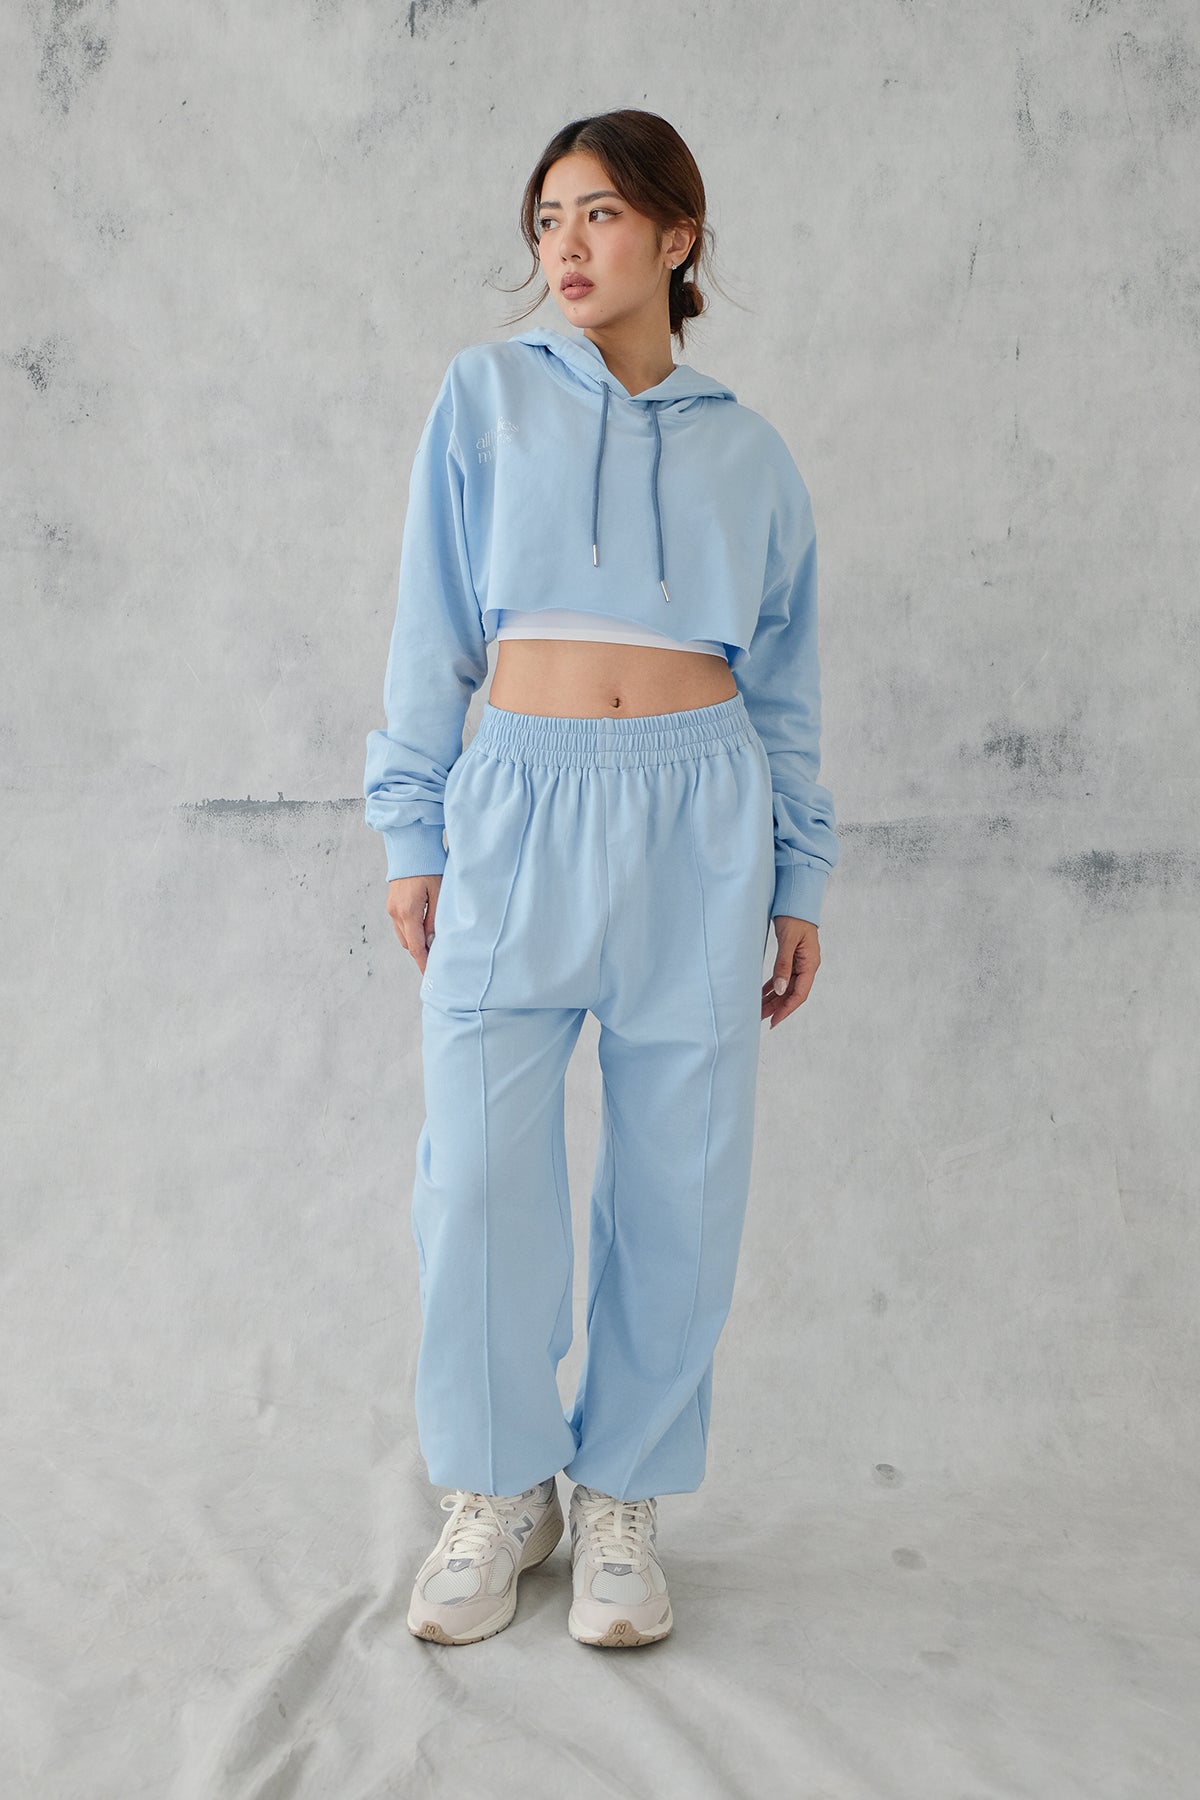 All Bodies Matter Jogger In Baby Blue (5 LEFT)